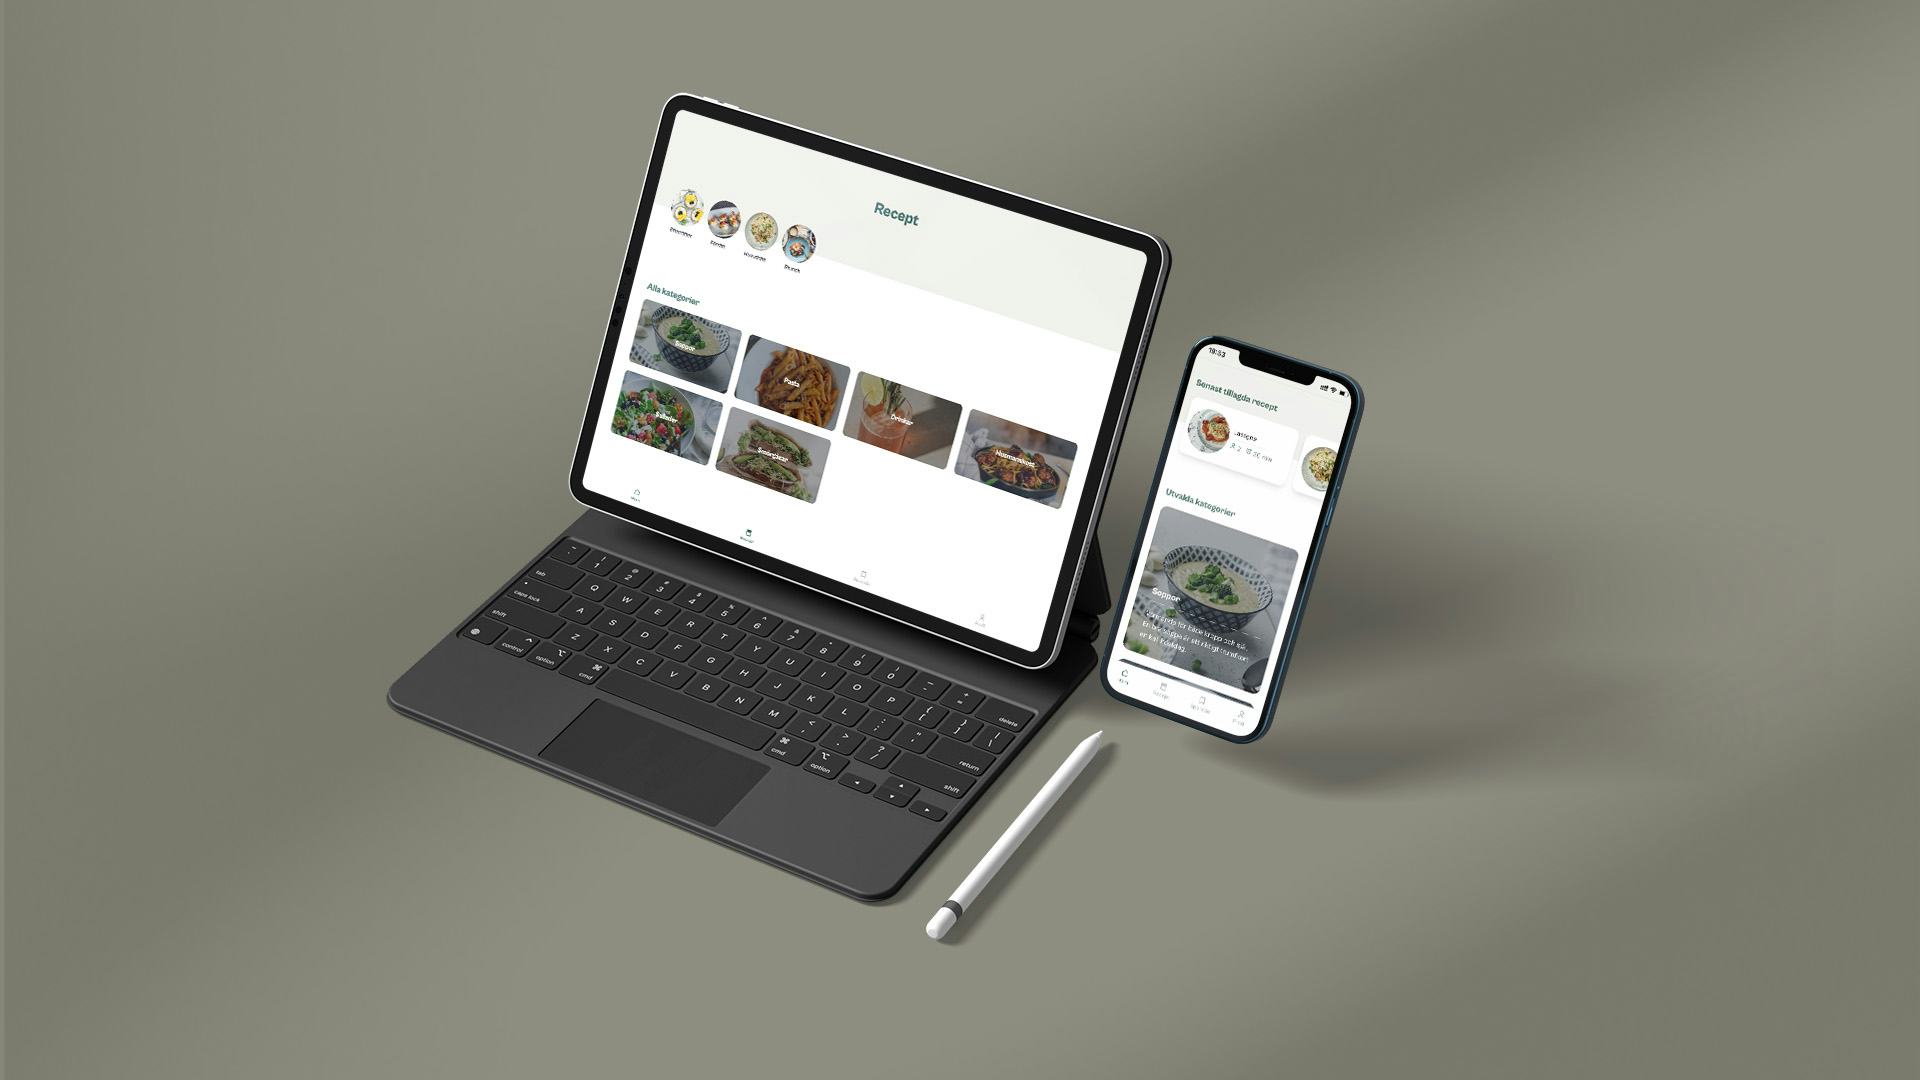 An iPad and iPhone showing the recipe app in a pale green surrounding.